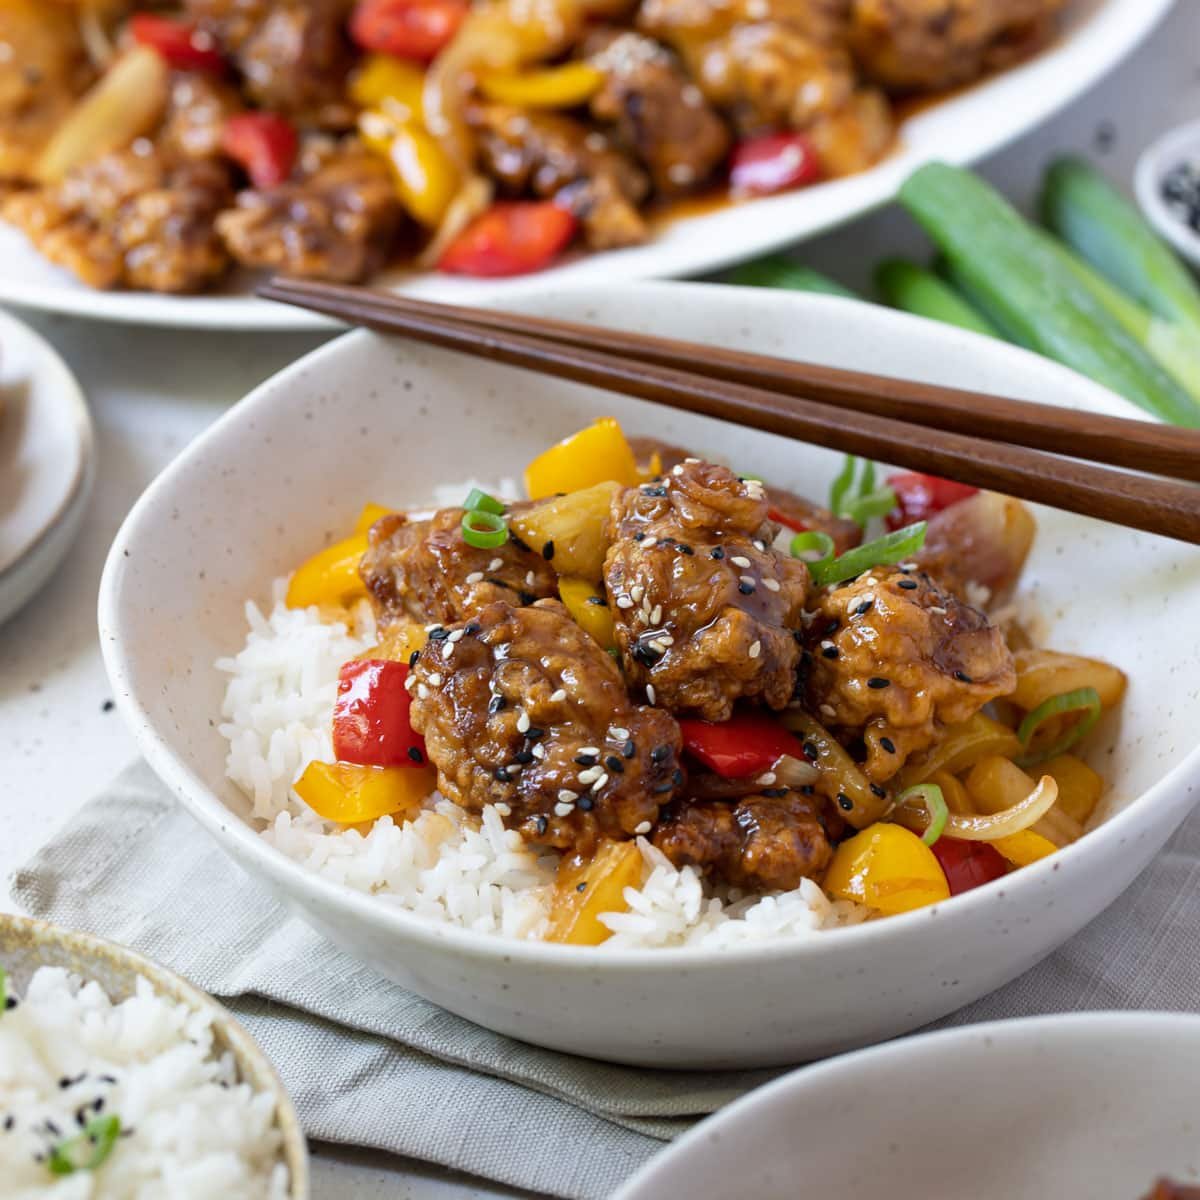 https://www.thecookingcollective.com.au/wp-content/uploads/2023/01/sweet-and-sour-pork-5.jpg